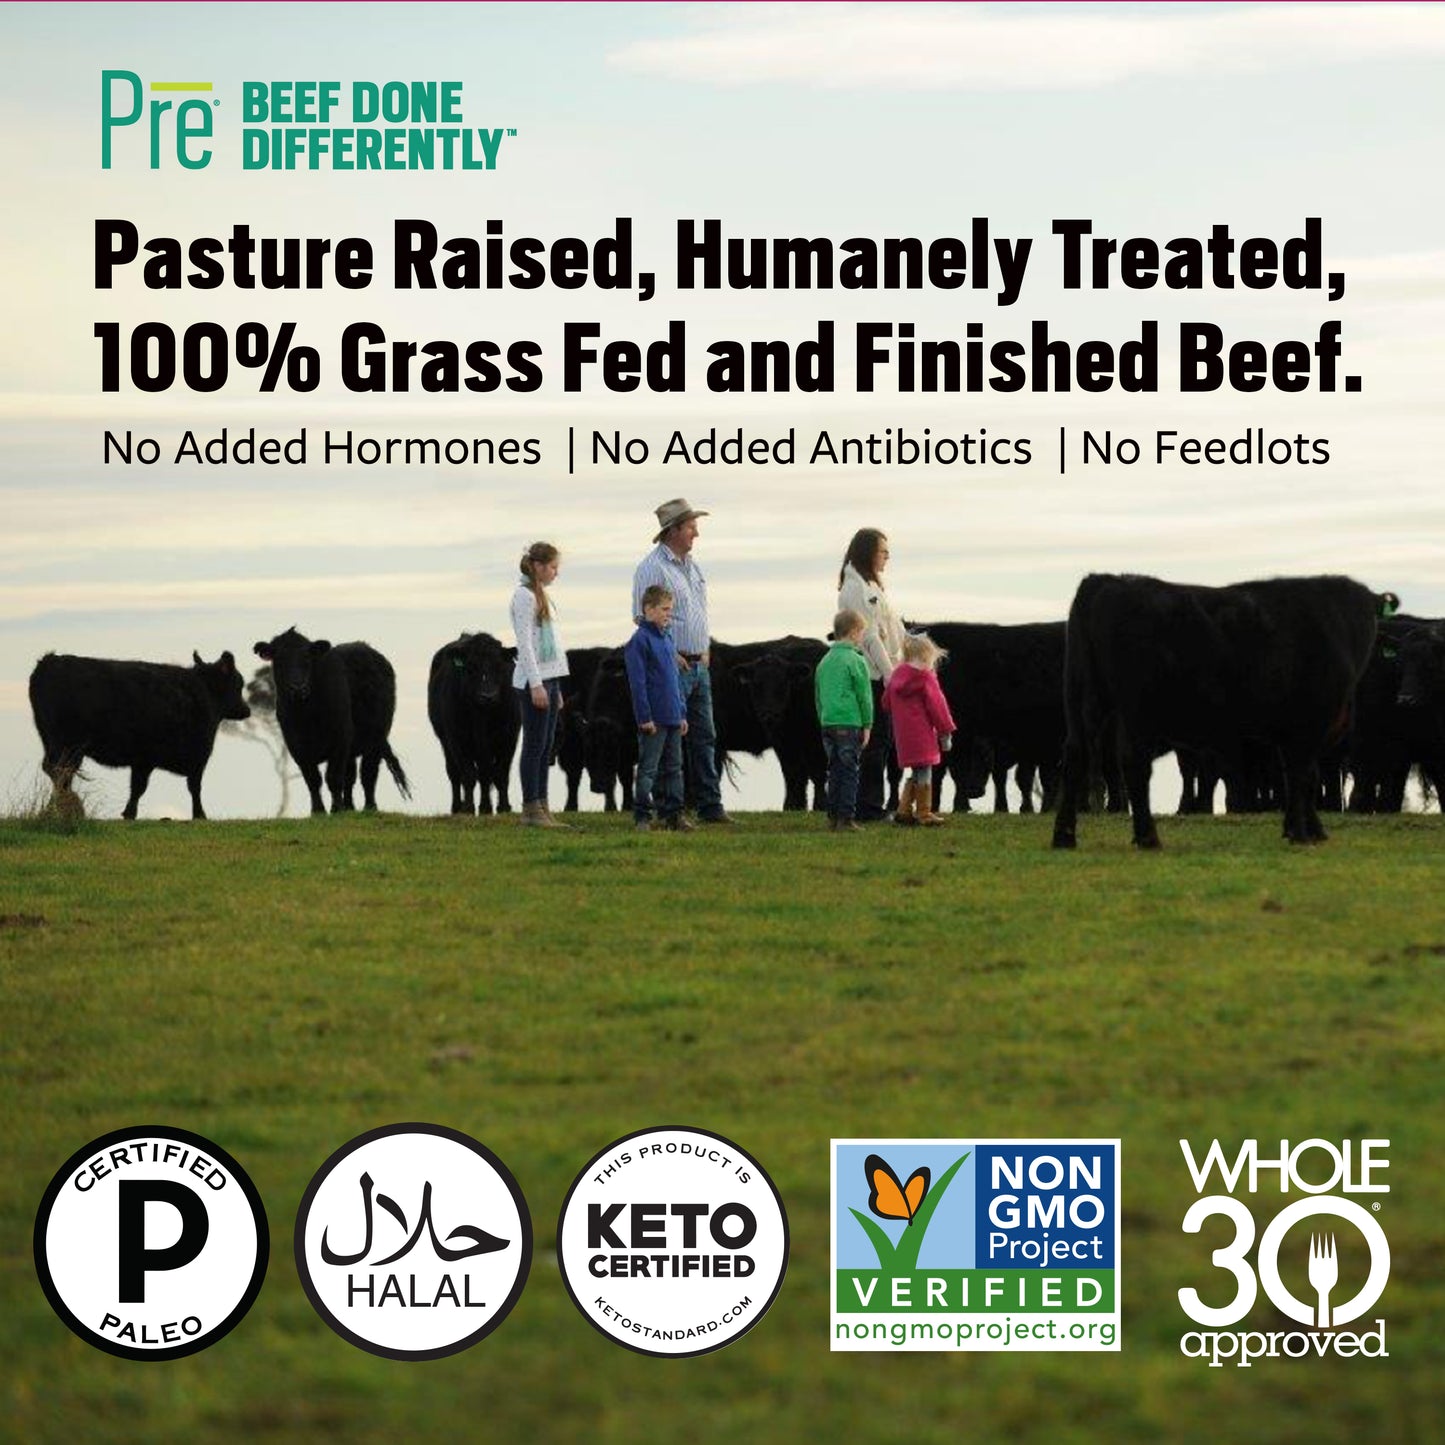 A Pasture with a family and cattle with text that says "Pasture Raised, Humanely Treated, 100% Grass Fed and Finished Beef." No Added hormones, no added antibiotics and no feedlots.